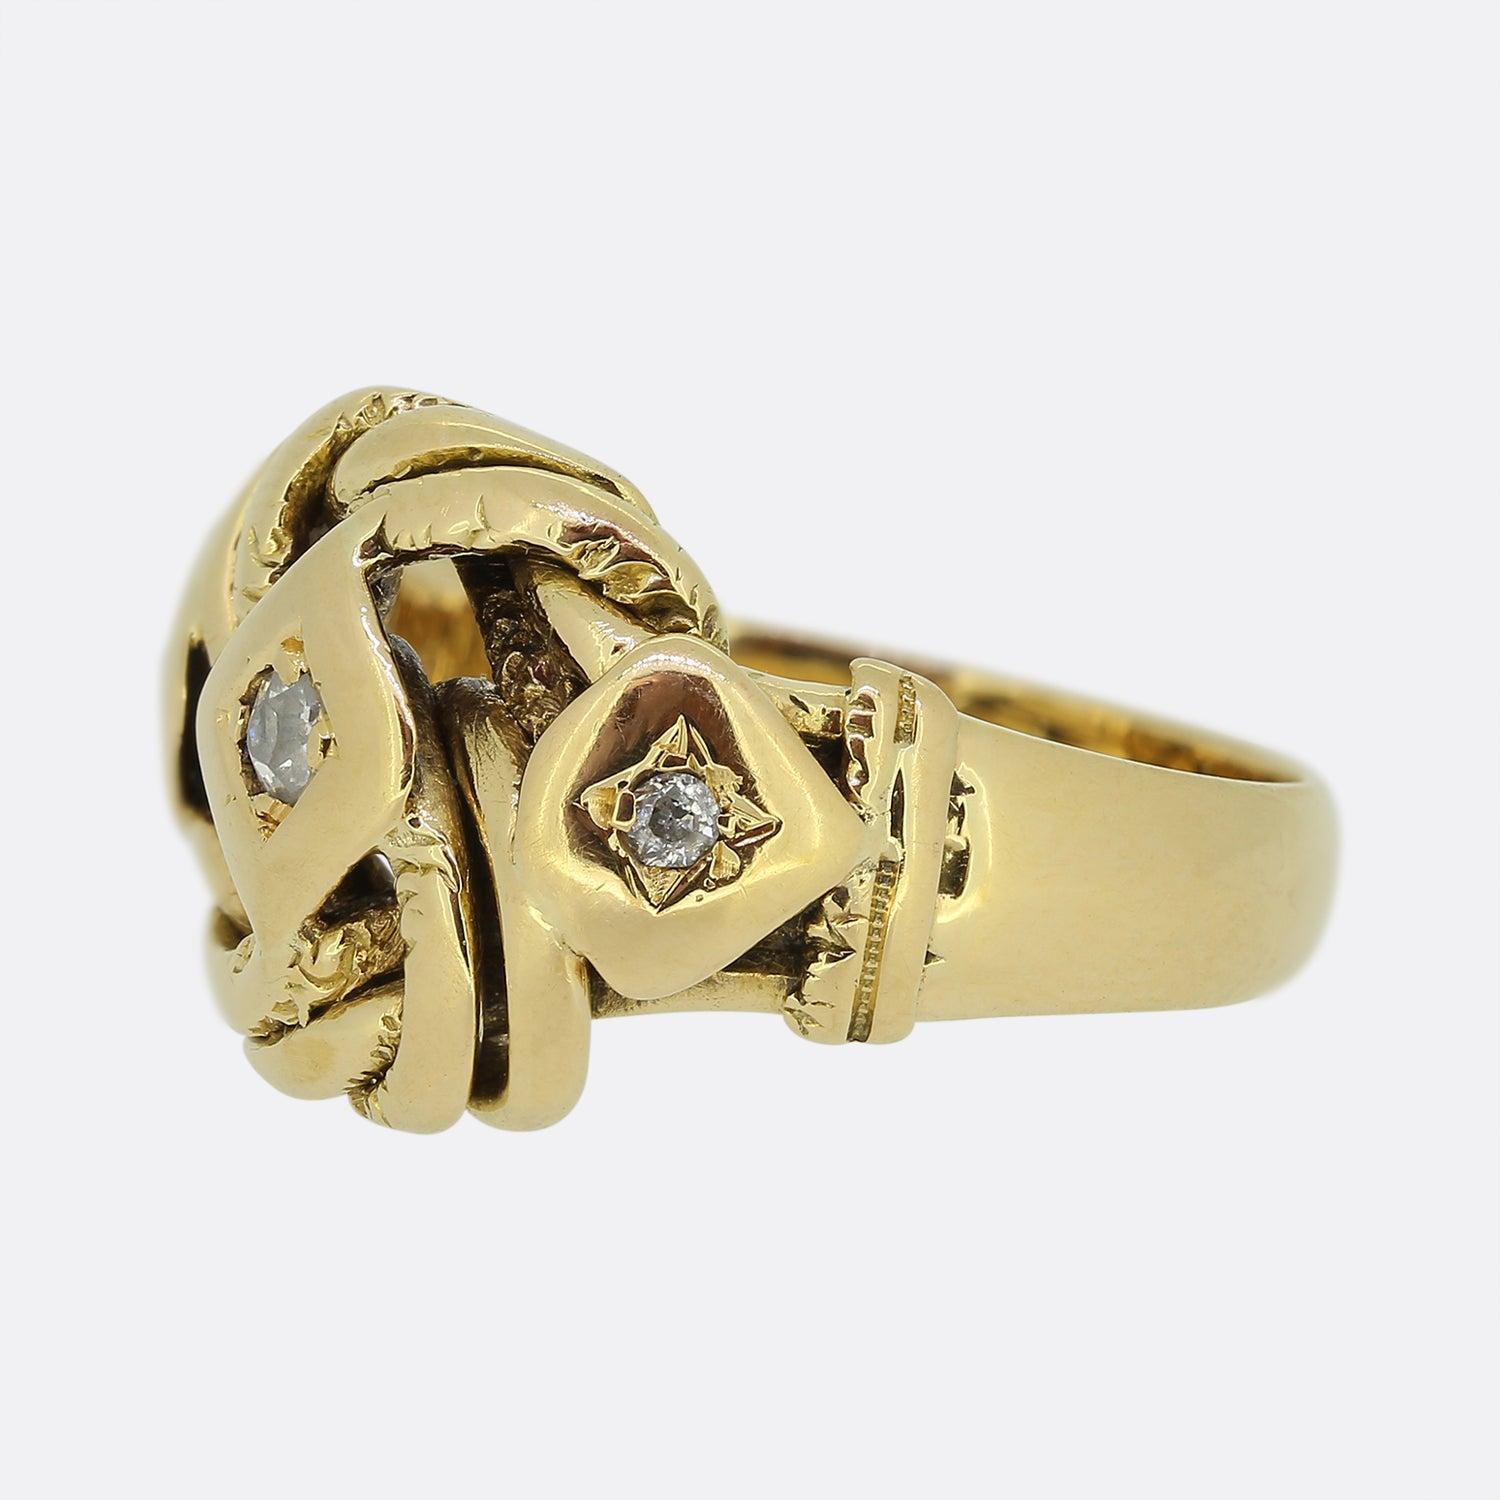 Here we have an antique knot ring from the Victorian era. This piece has been crafted from 18ct yellow gold and showcases a single old cut diamond set at the centre of a square shaped plaque. The same can be said for each smaller matching stone on